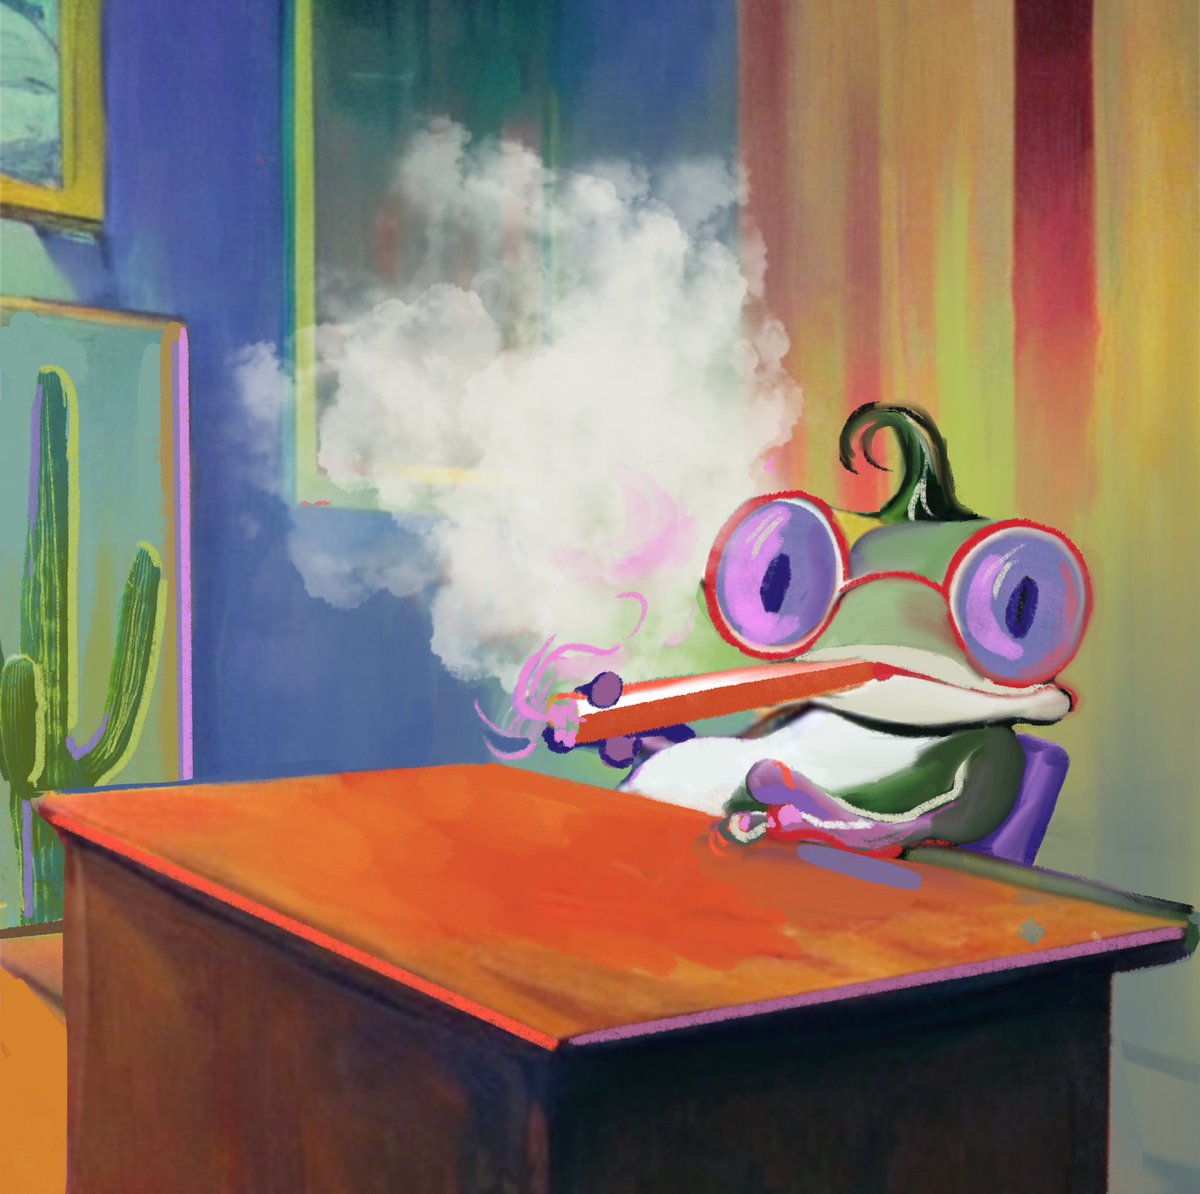 Goood Morning! 

Today I will drop my new nft made in collaboration with  #CactusBoomtez 
For #CactusBoom $pepe challenge 🐸
This bossy frog is full of energy to start new day!